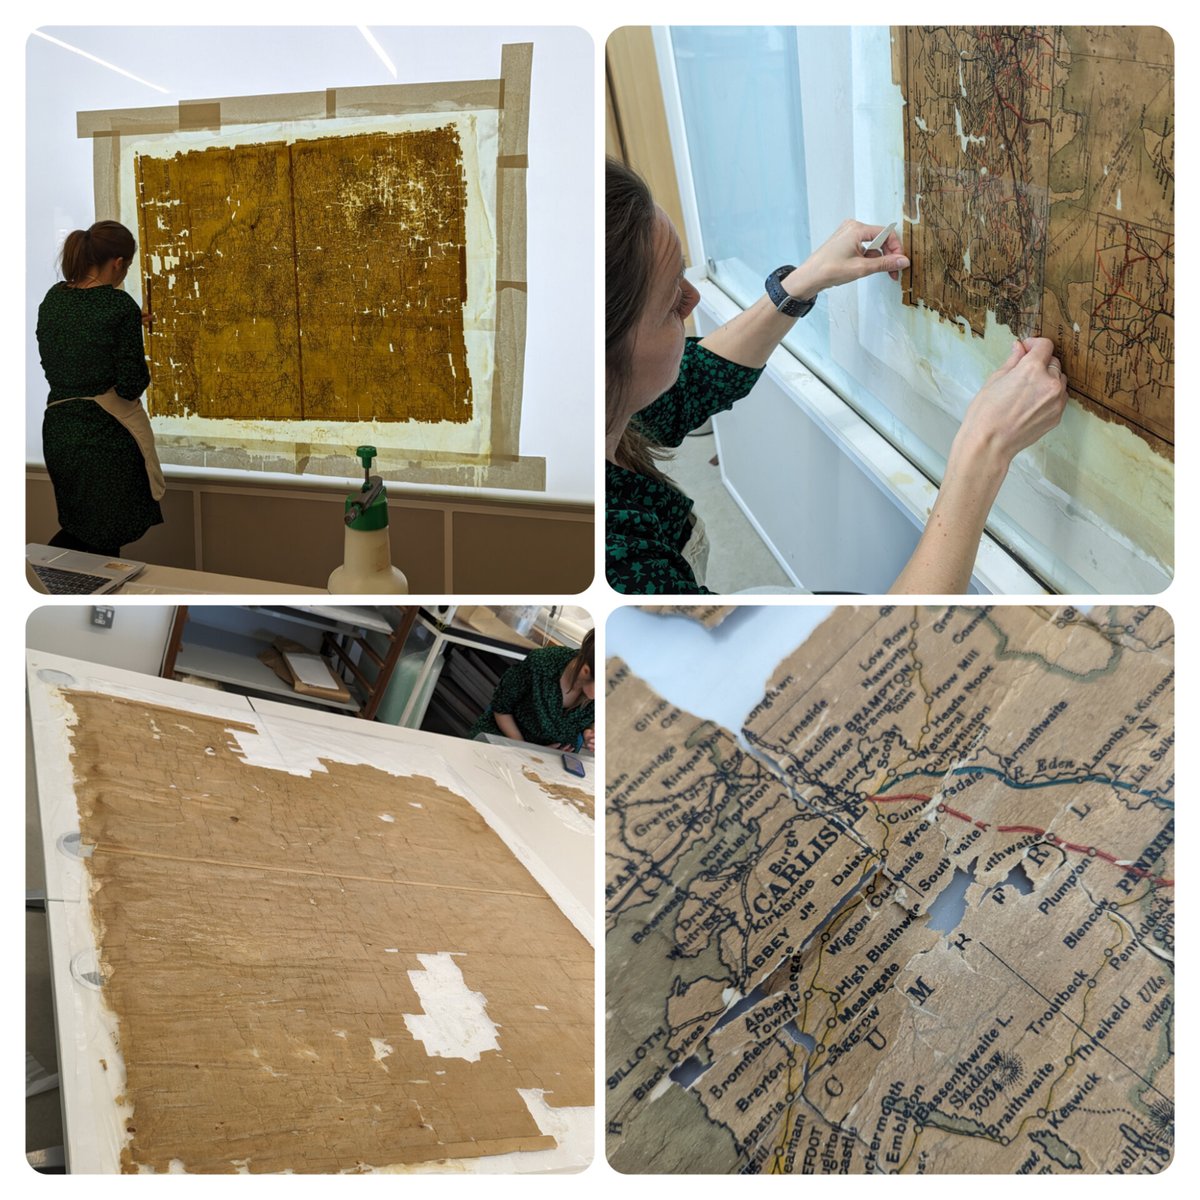 #TodayInConservation we are re-lining a Railway Map of England & Wales. The maps surface had been abraded and therefore the paper was very soft and fragmented. We have removed the varnish and lined it on a Japanese paper support on our map wall. #PaperConsevation #Map